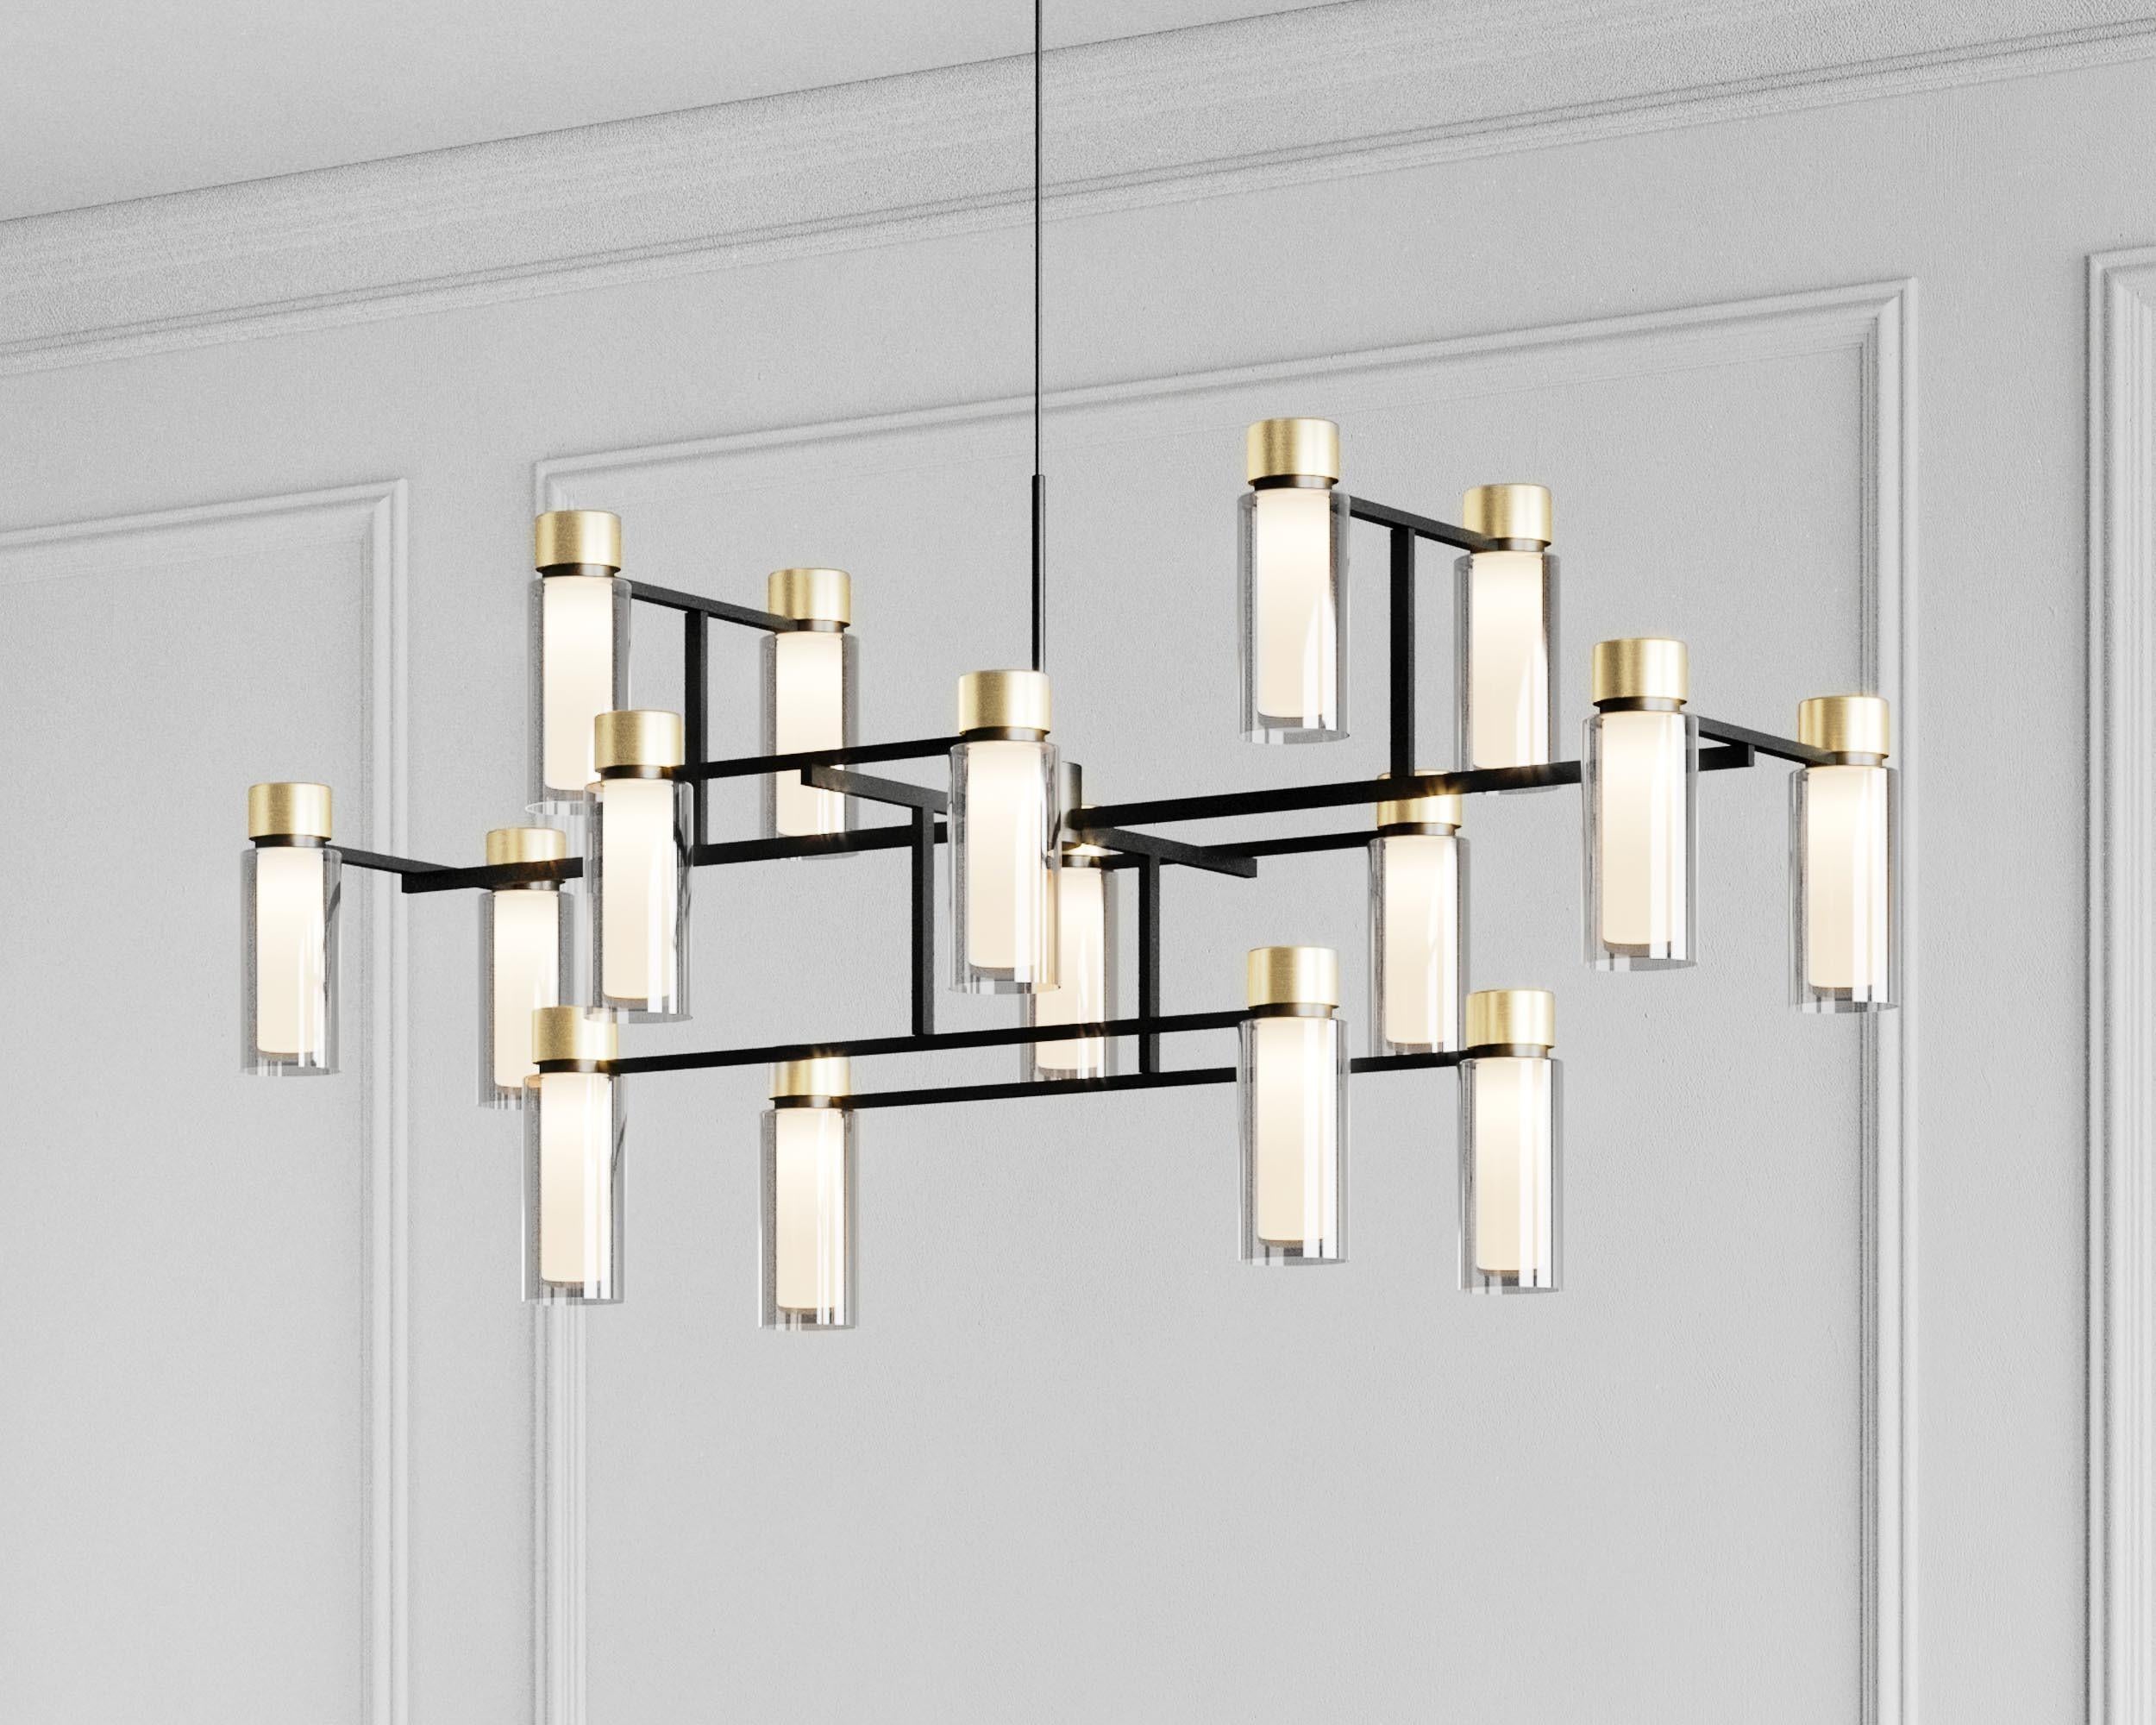 Chandelier Osman 560.17 by Corrado Dotti x TOOY
16 Lights

Compliant with USA electrical system

Model shown:
Finish: Brushed brass
Color: Clear glass

Lighting source : 16 x E14 220/240V

Pendant: Cable length 60 / 90 cm. 

50s Inspired collection